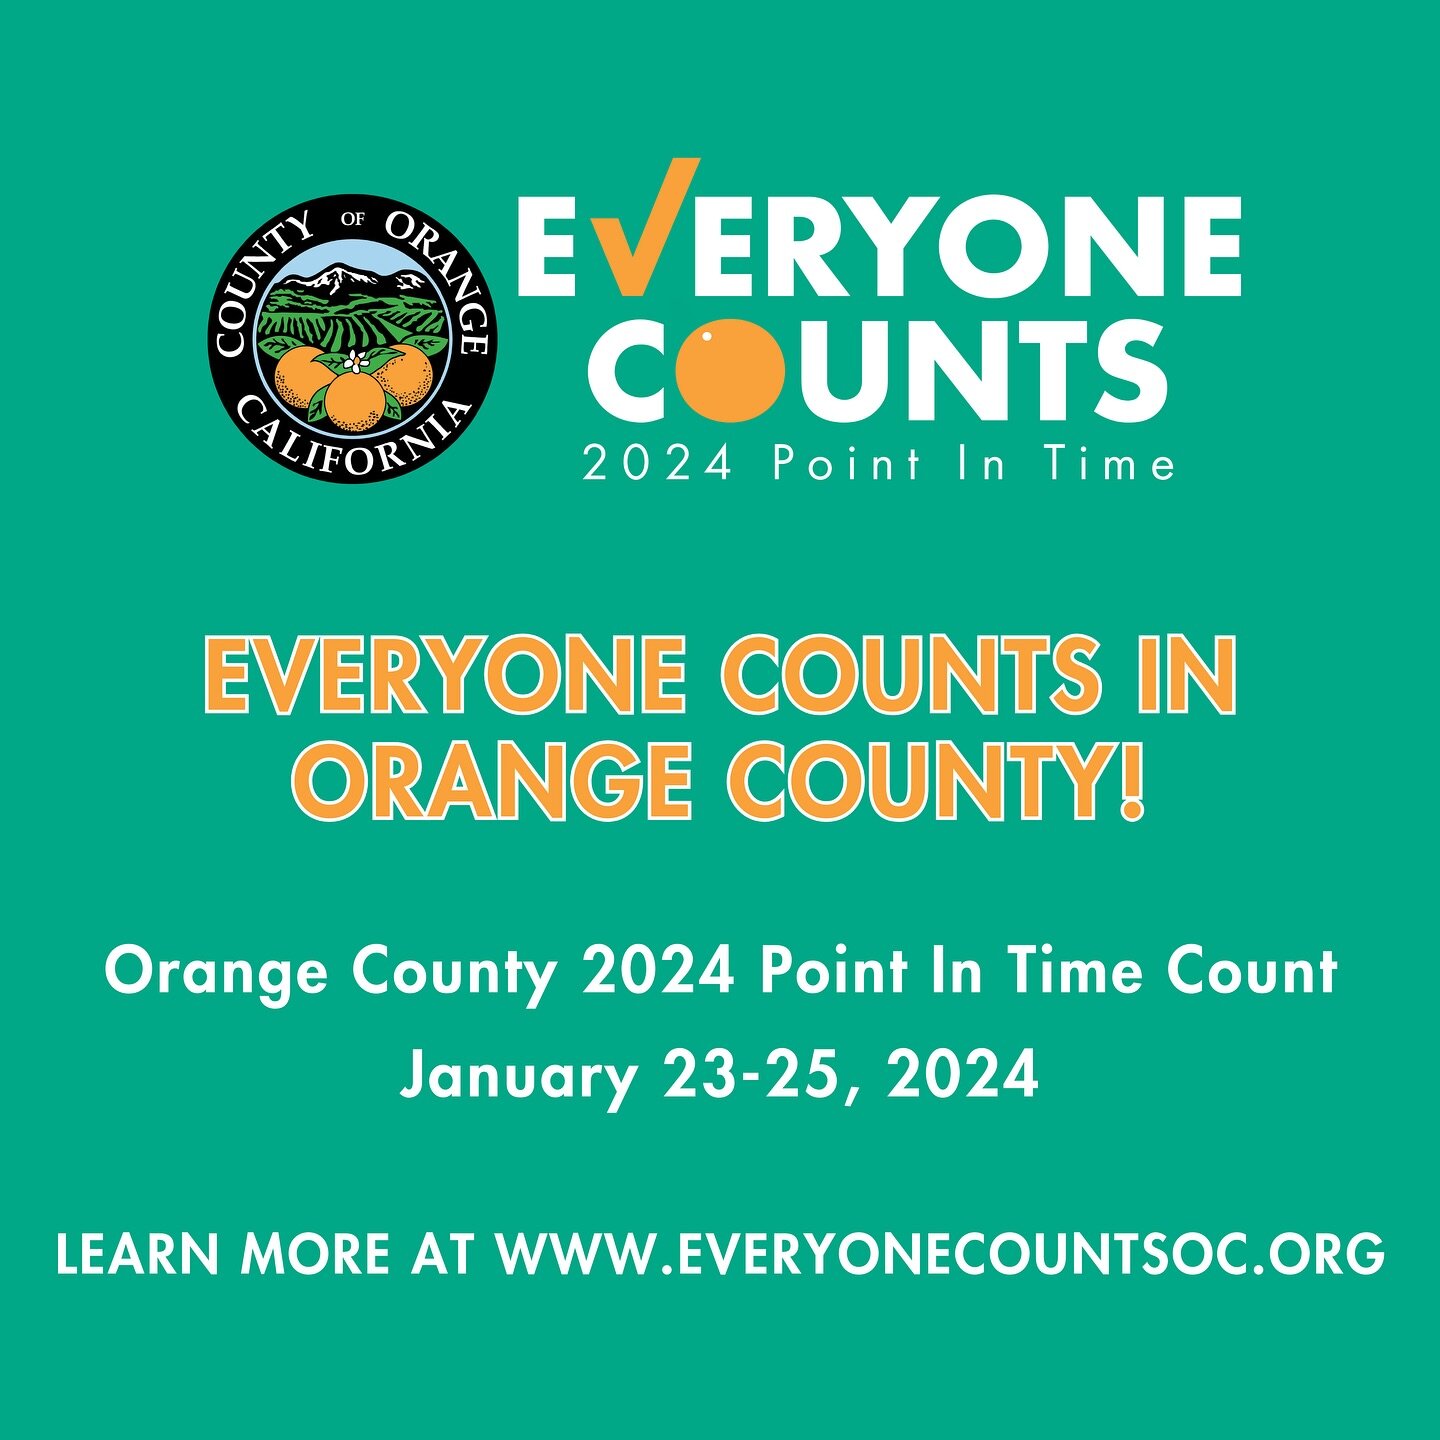 @EveryoneCountsOC is an initiative of the County of Orange (County) and Orange County Continuum of Care (CoC). The Orange County 2024 Point In Time Count provides vital information to better understand homelessness in the community and guides the way